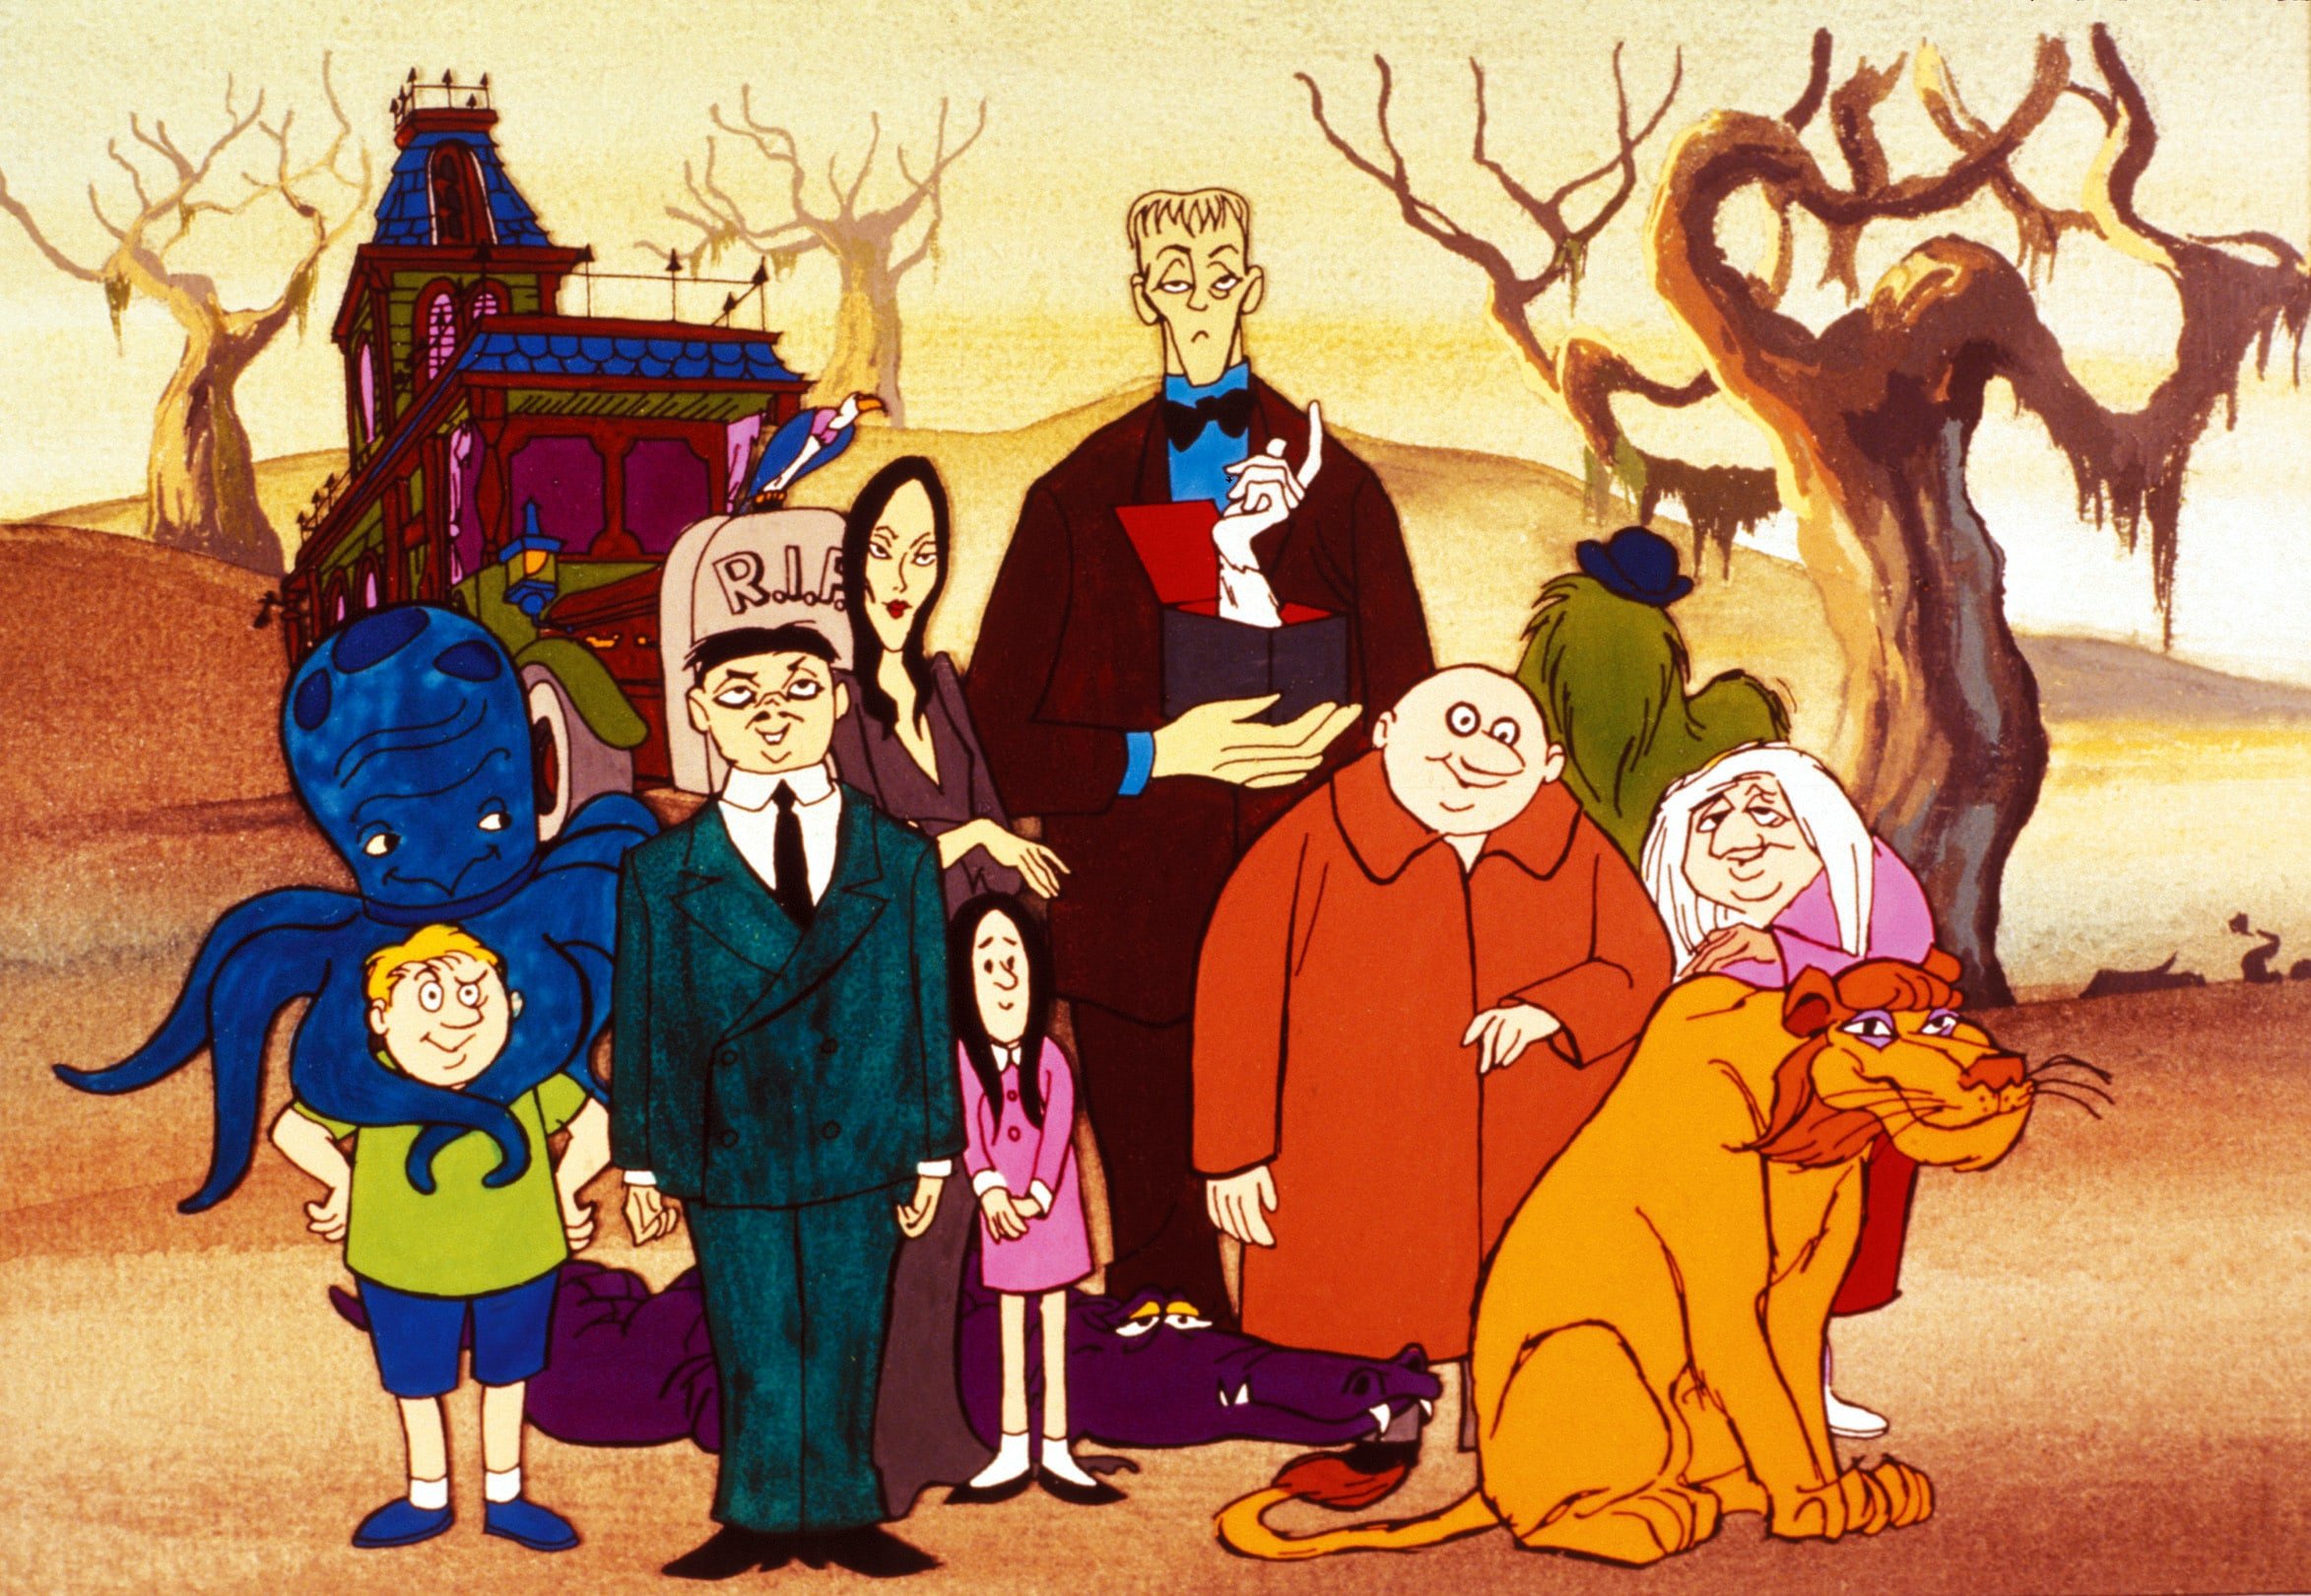 THE ADDAMS FAMILY, Pugsley, Gomez, Morticia, Wednesday, Lurch, Thing, Uncle Fester, Cousin It, Granny, 1973-75 